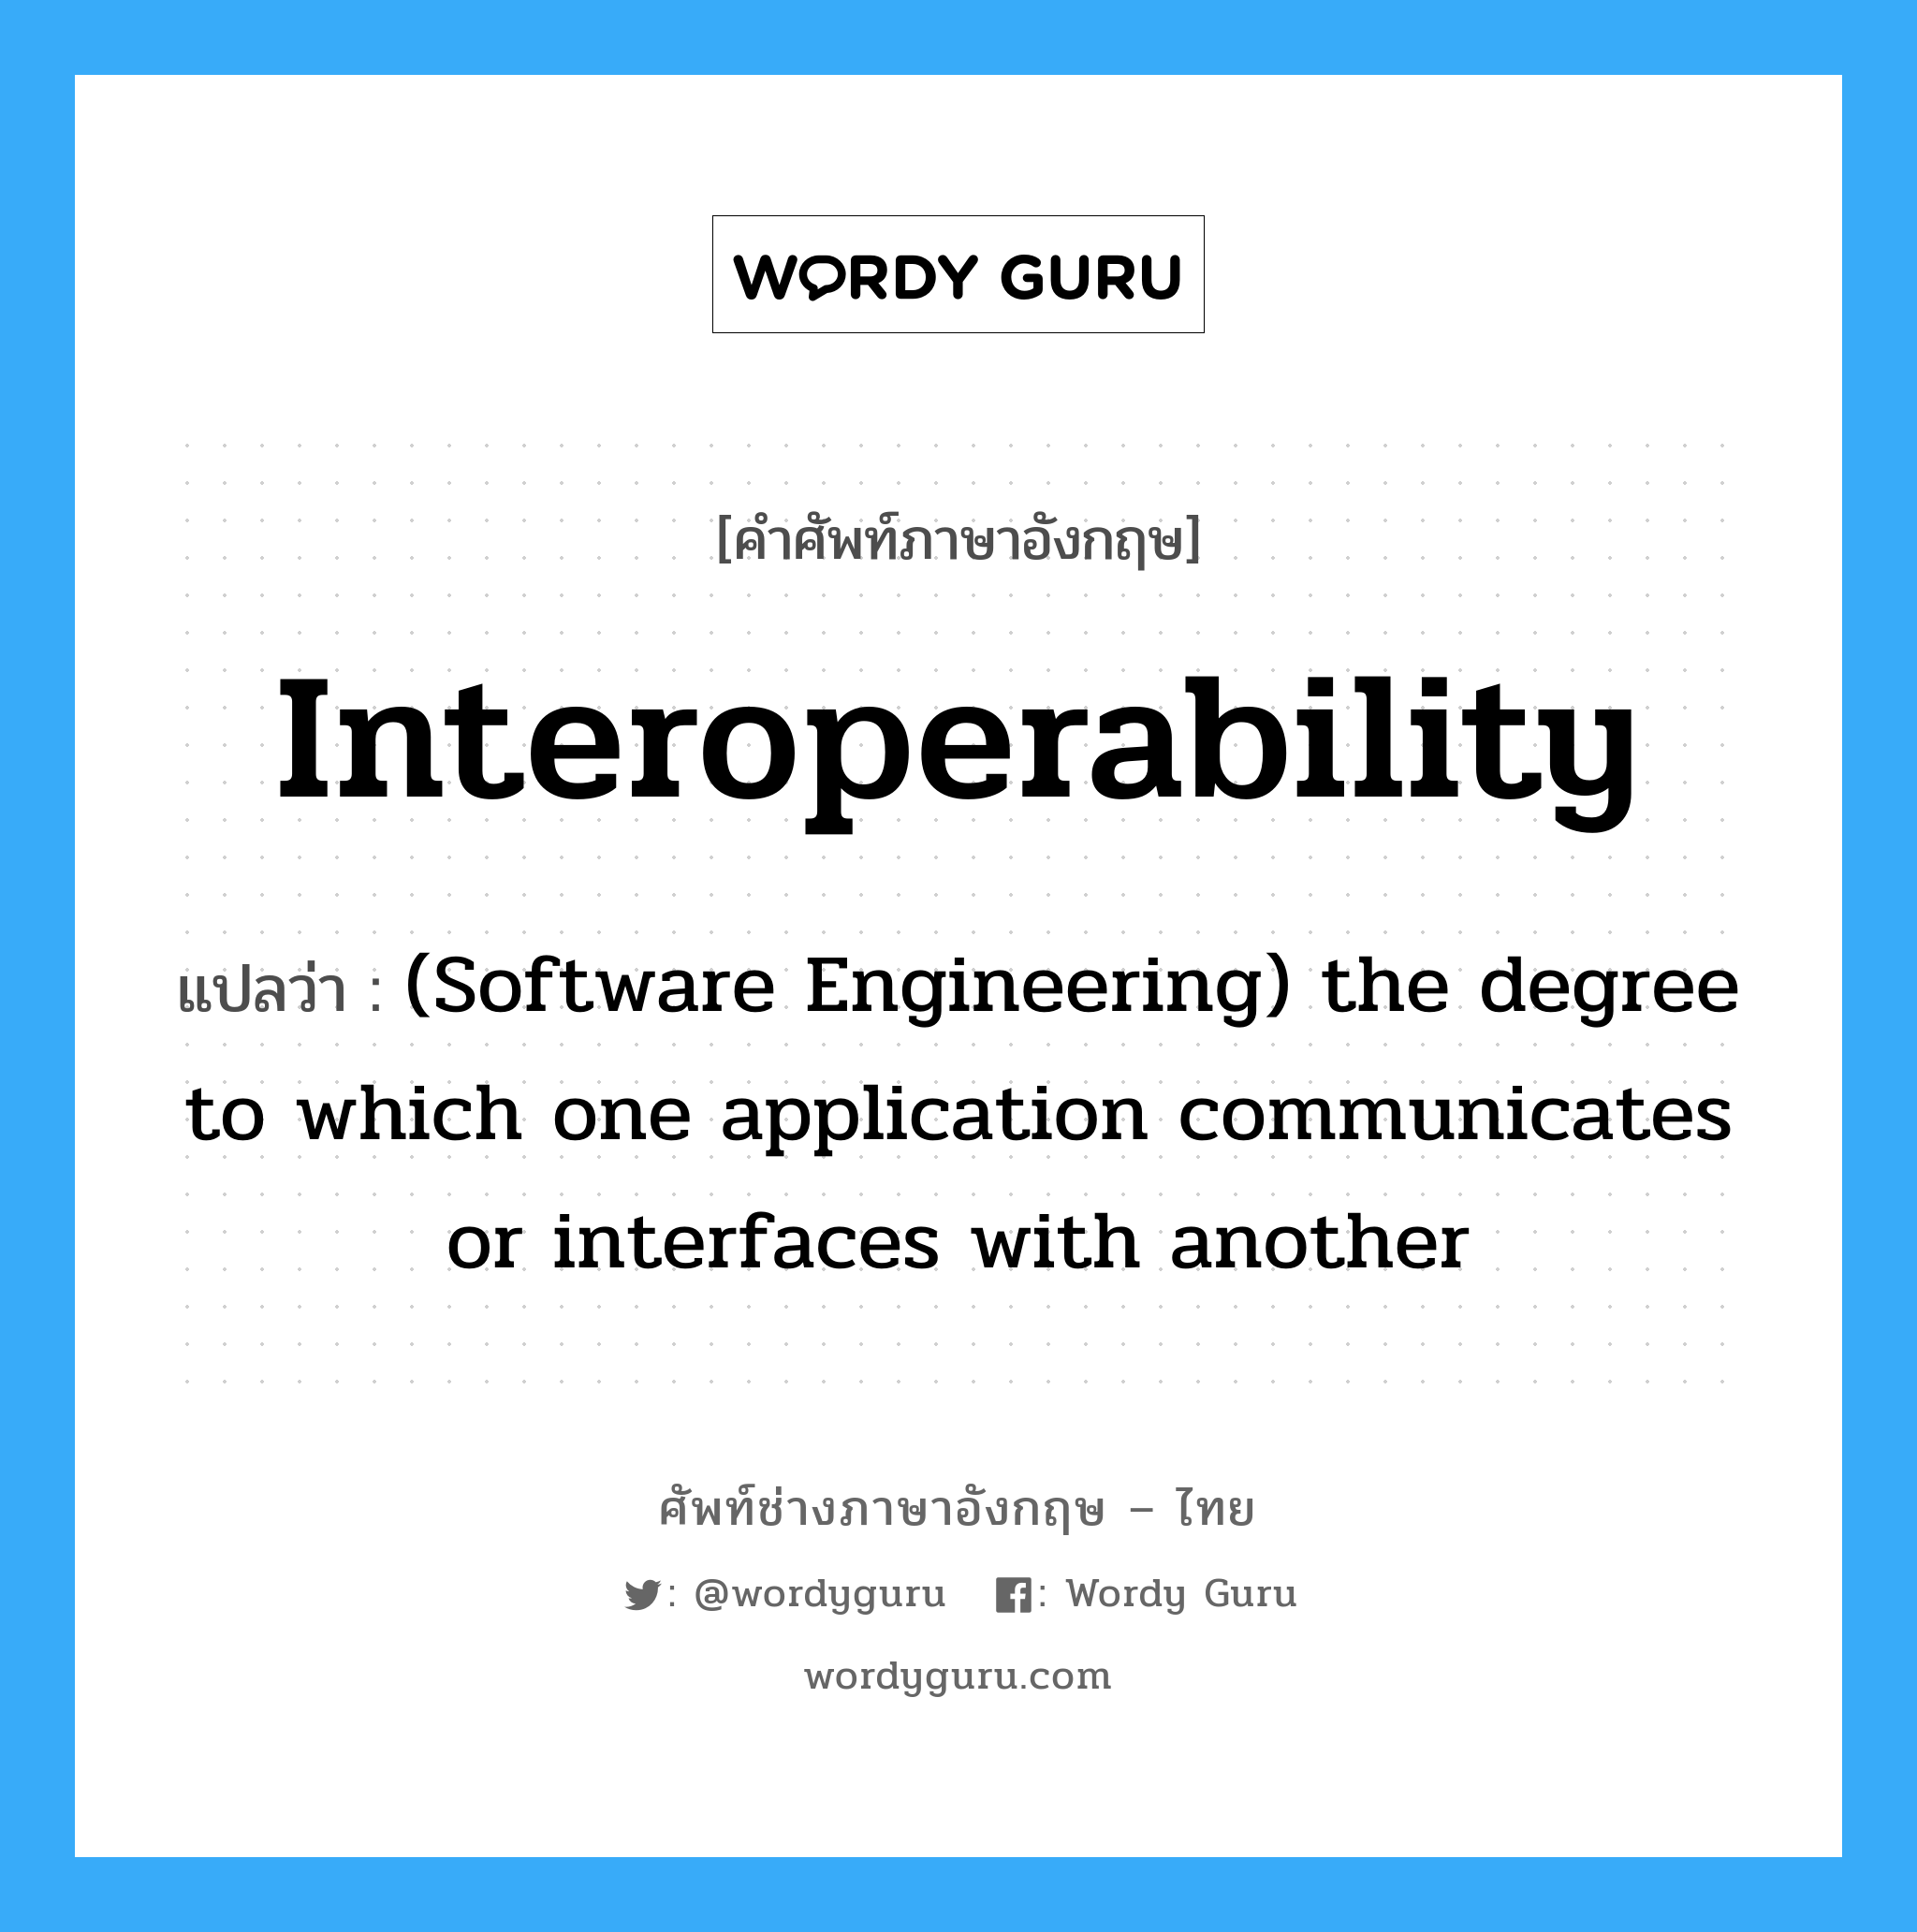 Interoperability แปลว่า?, คำศัพท์ช่างภาษาอังกฤษ - ไทย Interoperability คำศัพท์ภาษาอังกฤษ Interoperability แปลว่า (Software Engineering) the degree to which one application communicates or interfaces with another